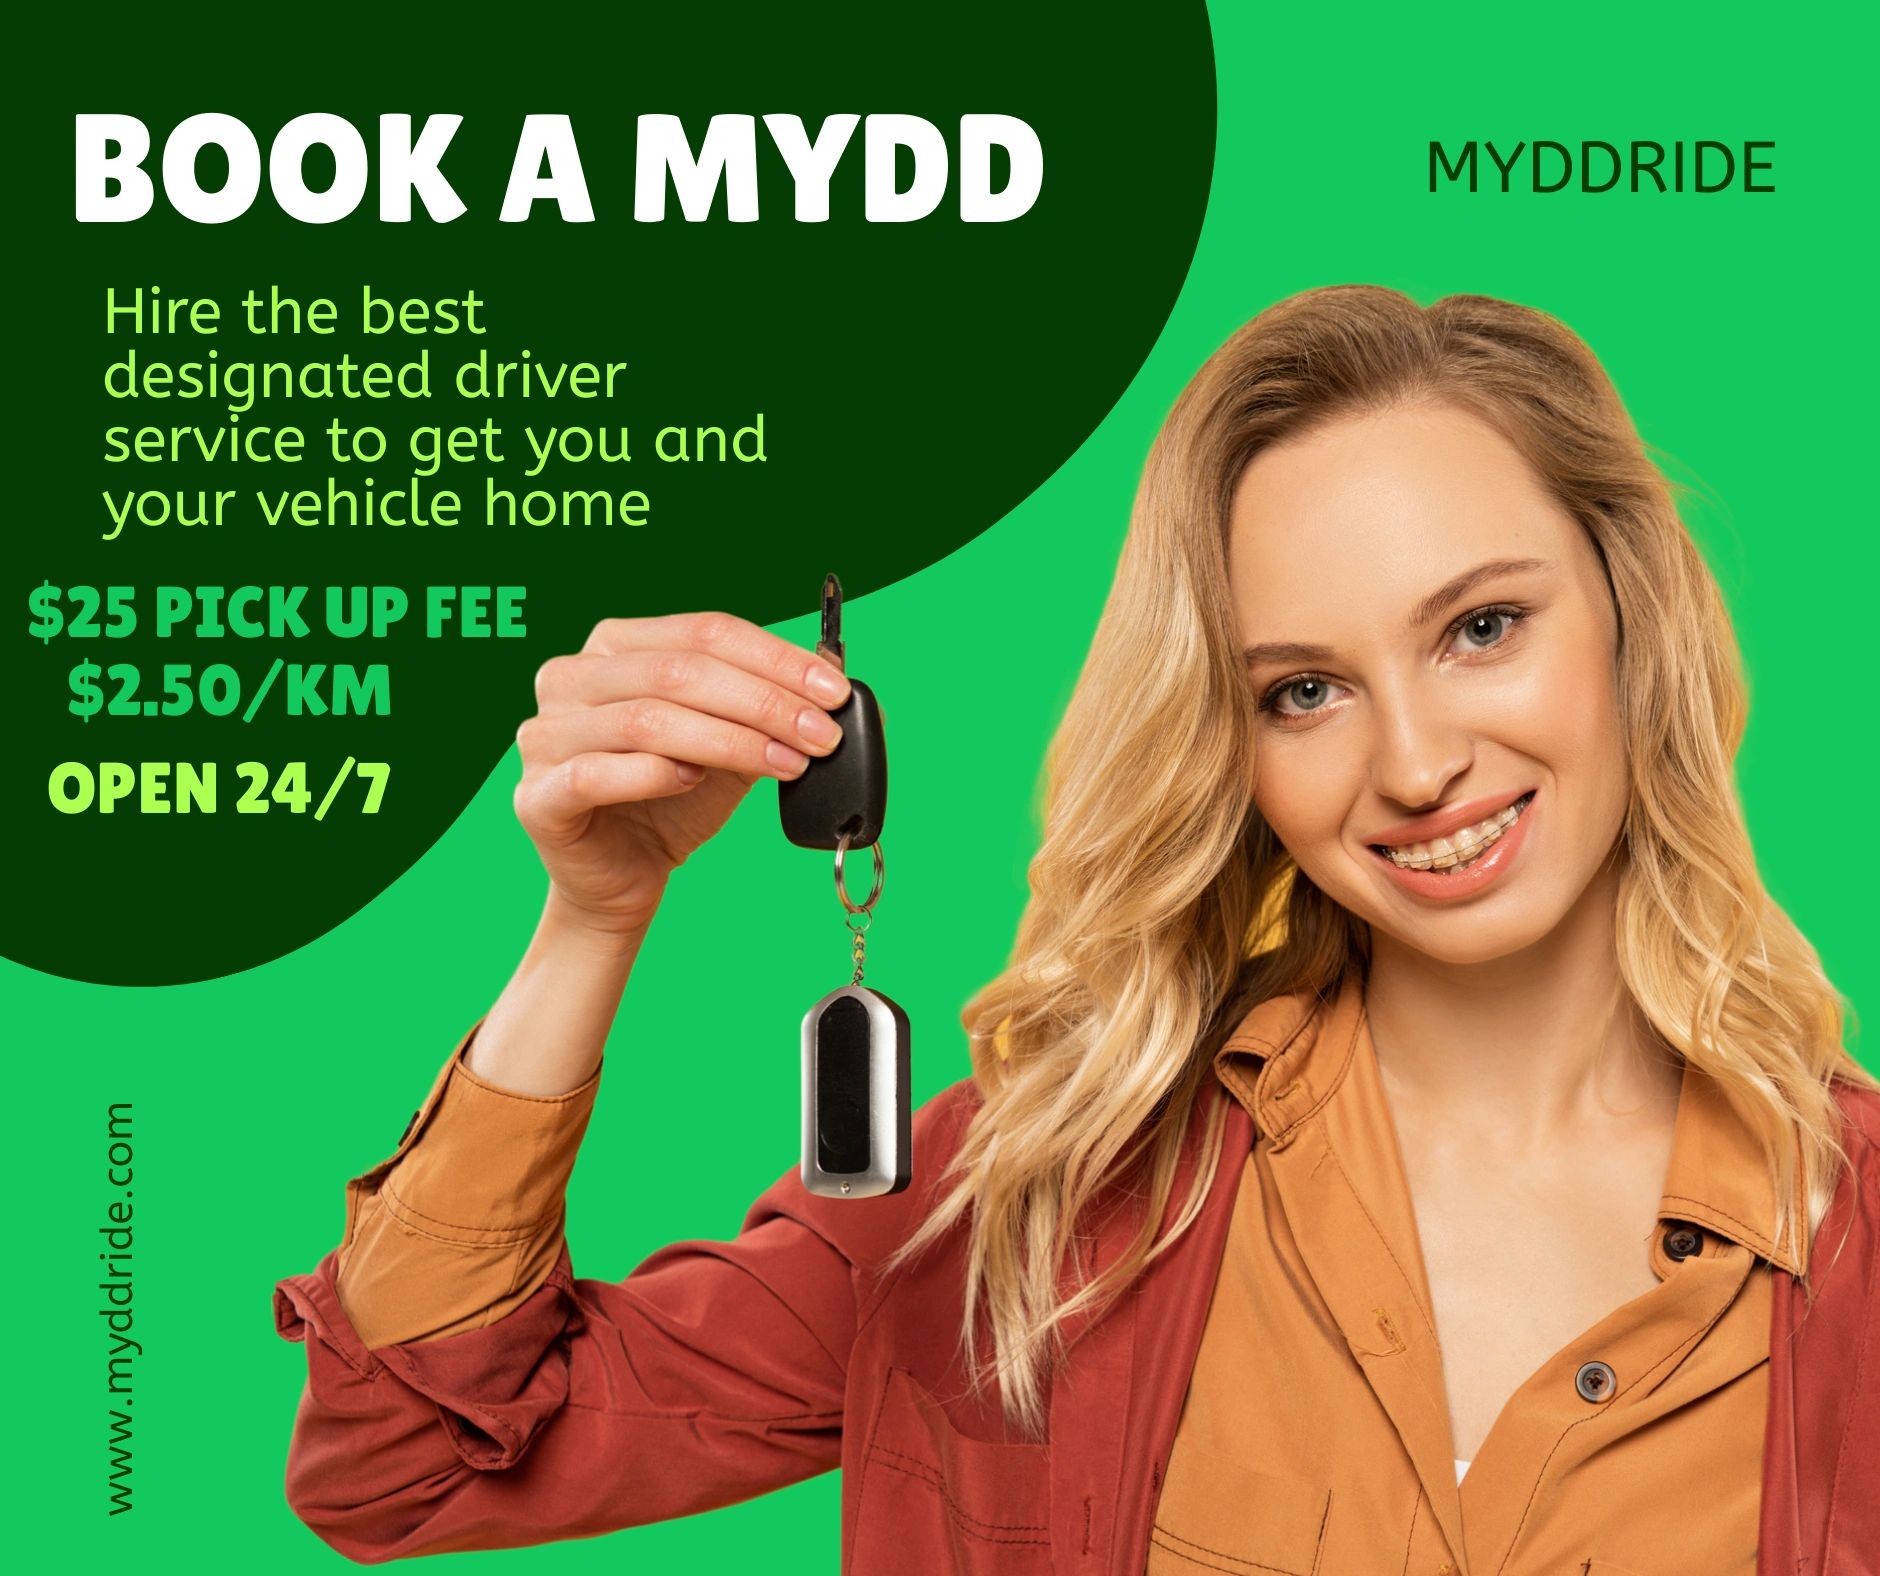 MyDDride connecting designated drivers with impaired drivers for a safe ride home. That's a MyDD!